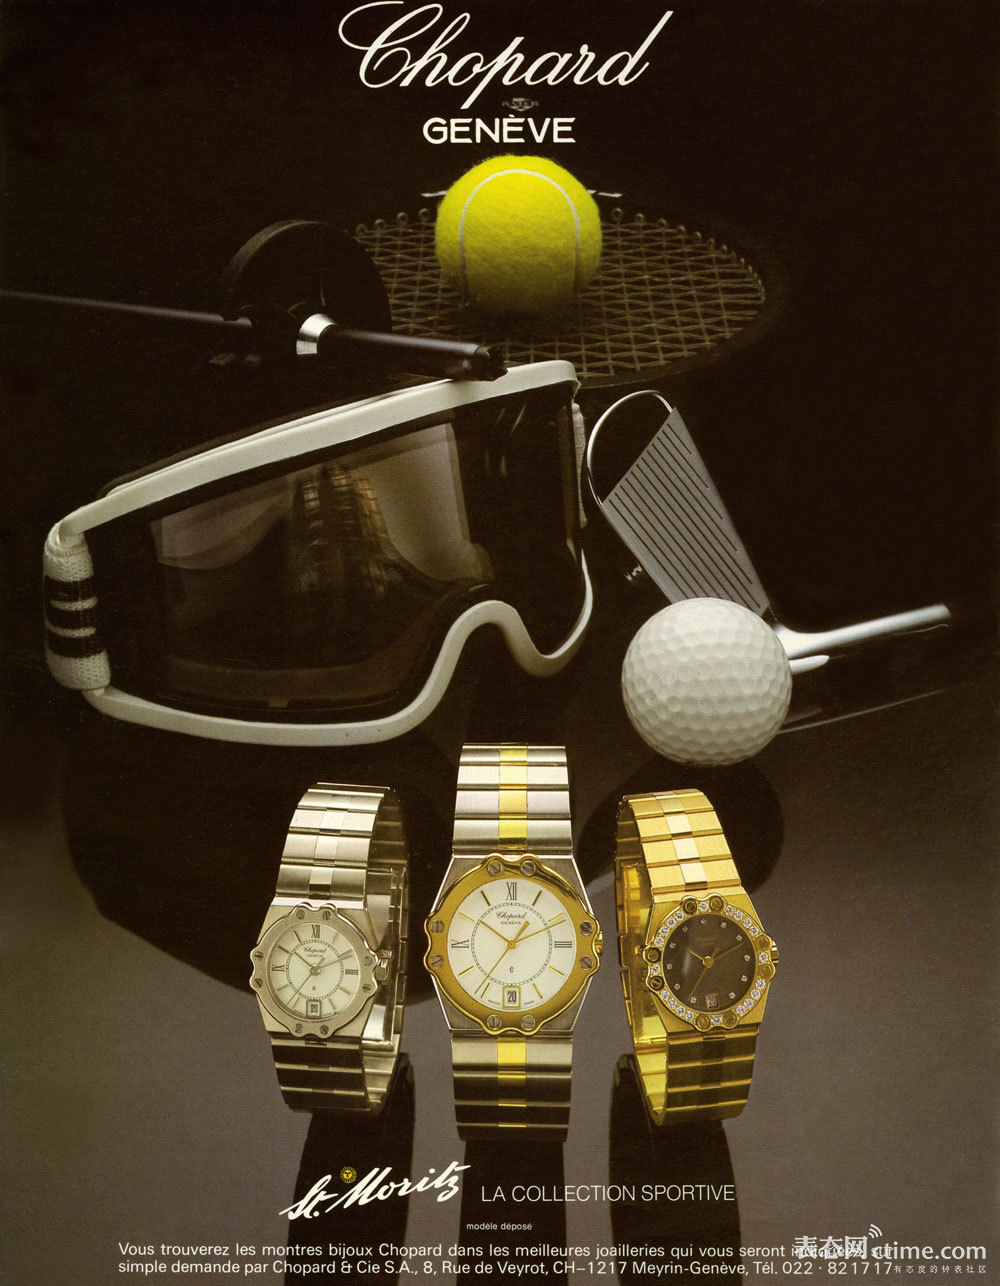 St.-Moritz-Advertising-Campaign-in-the-1980's_3.jpg